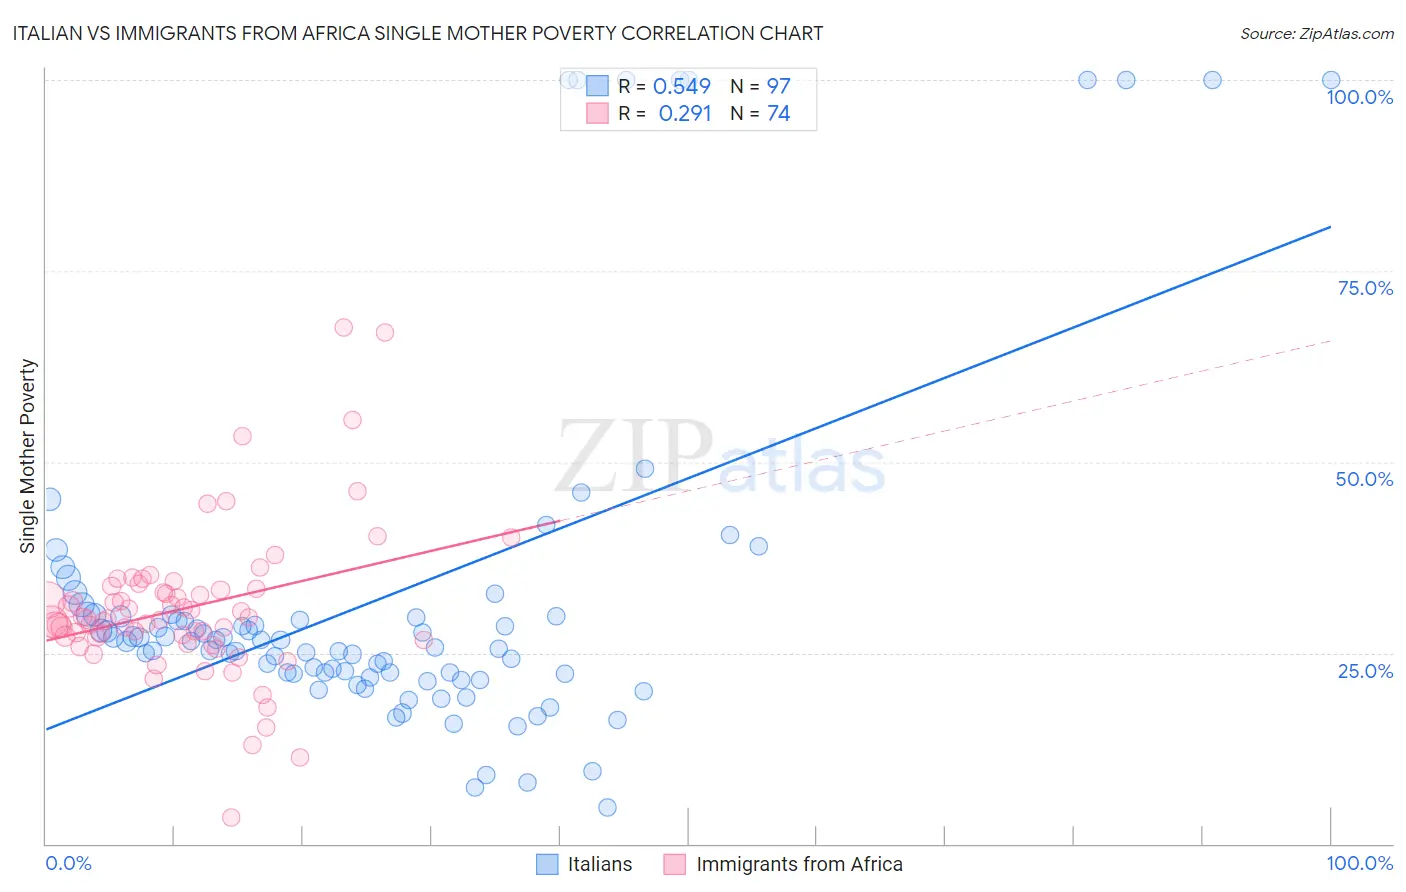 Italian vs Immigrants from Africa Single Mother Poverty